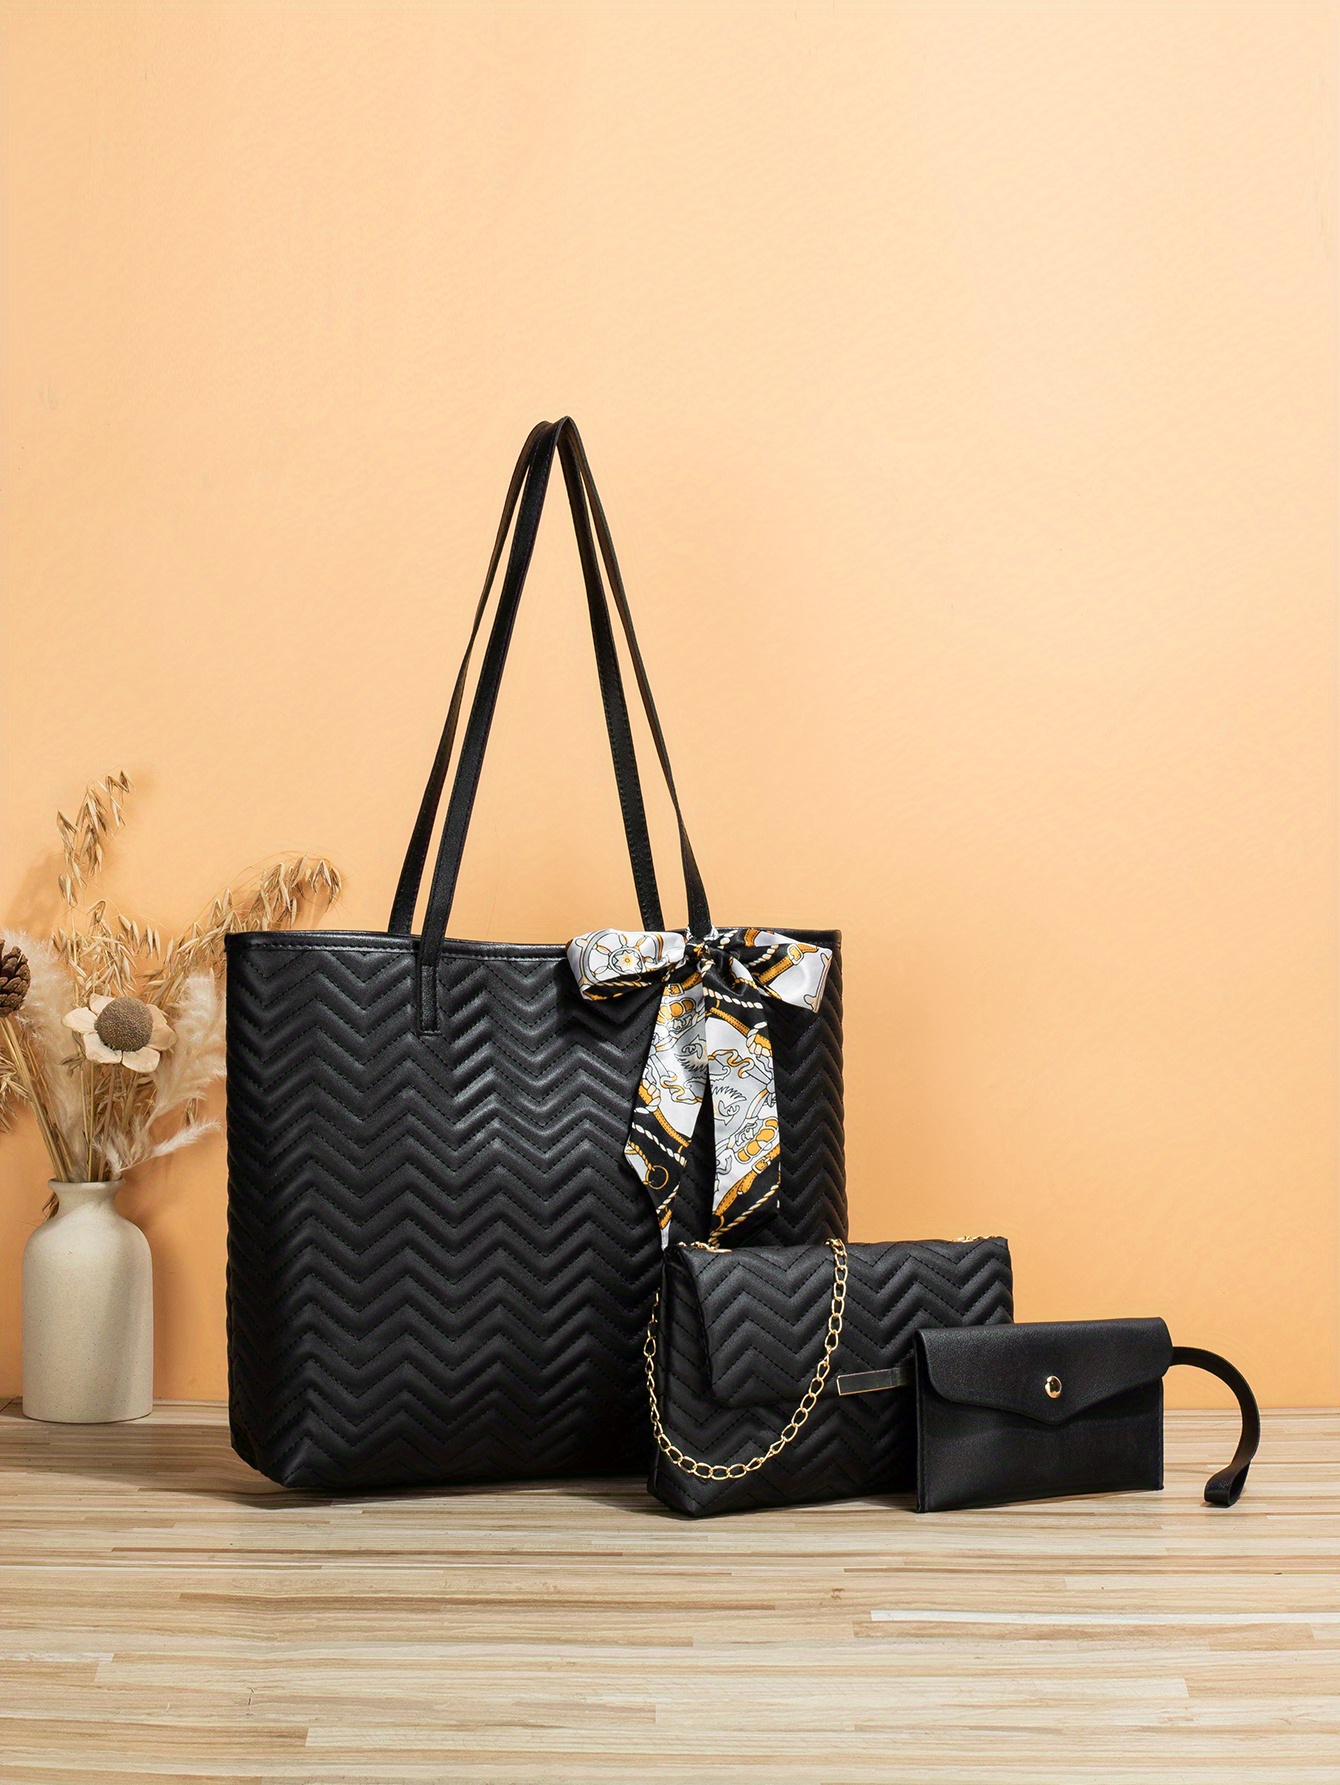 Quilted Detail Bag Sets, Solid Color Tote Bag With Shoulder Chain